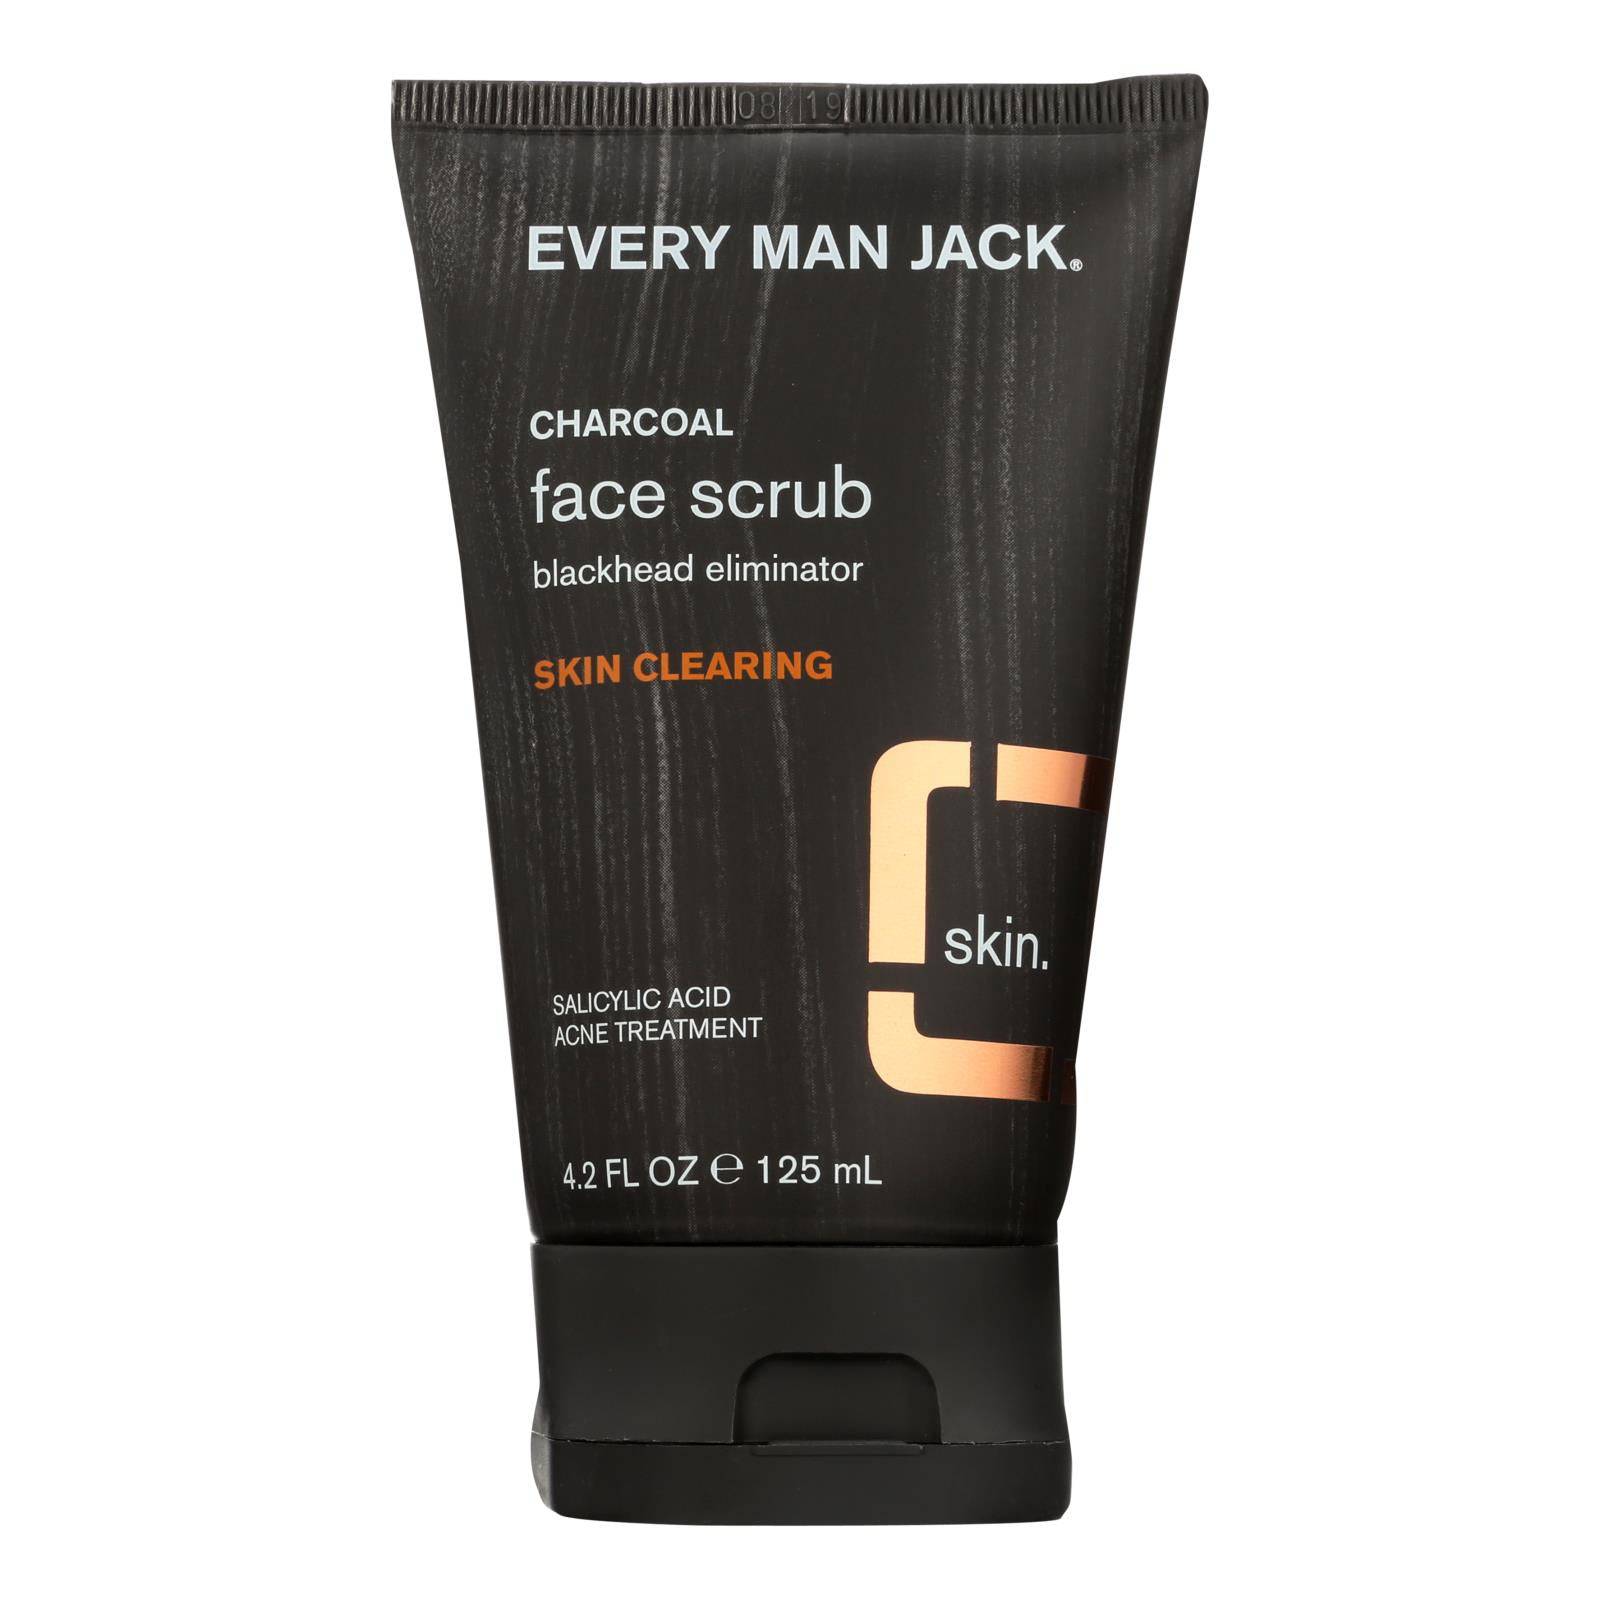 Buy Every Man Jack Face Scrub - Skin Clearing - 4.2 Oz  at OnlyNaturals.us